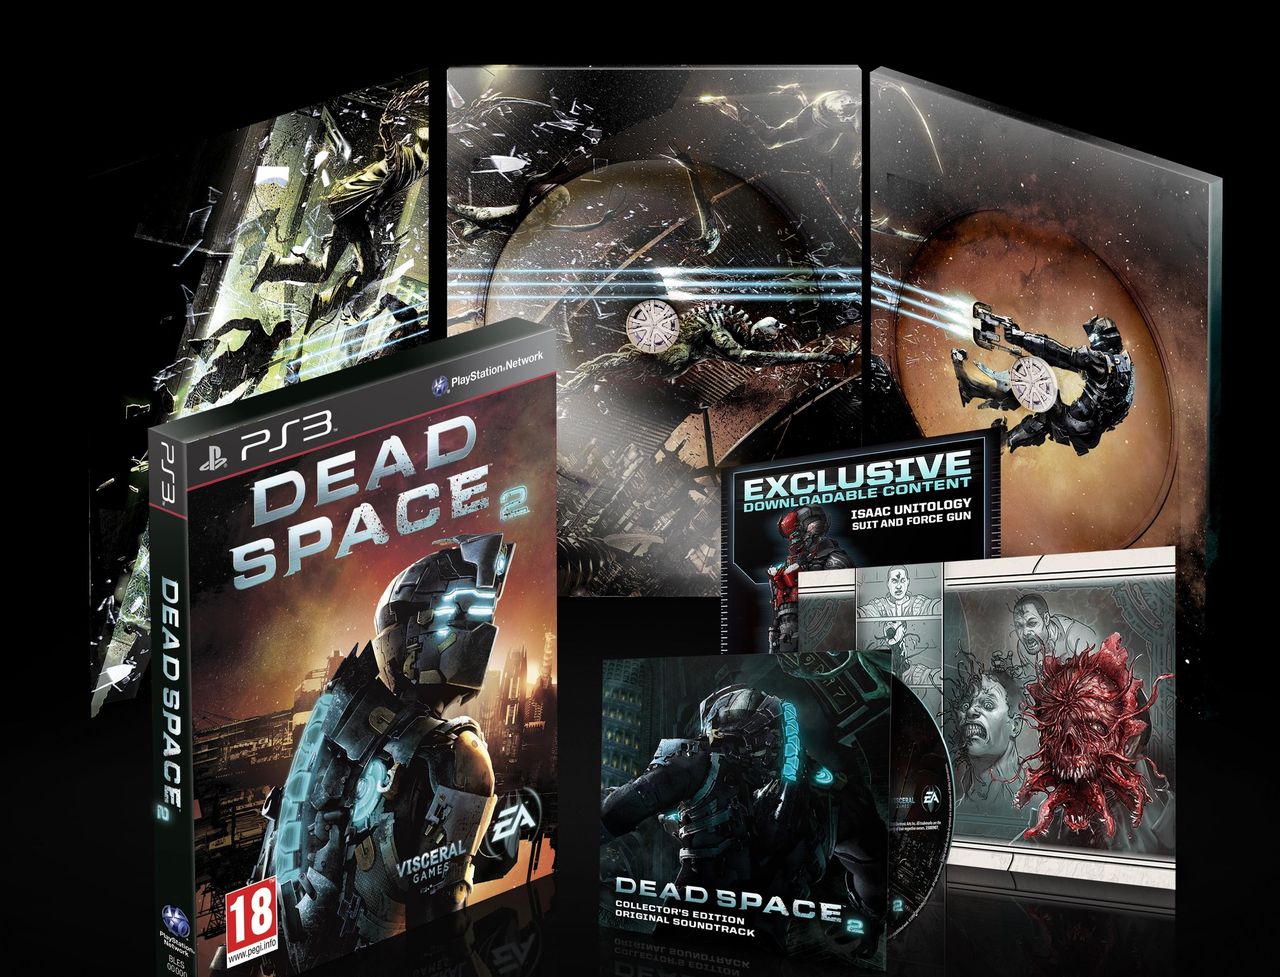 dead space 2 doesnt load ps3